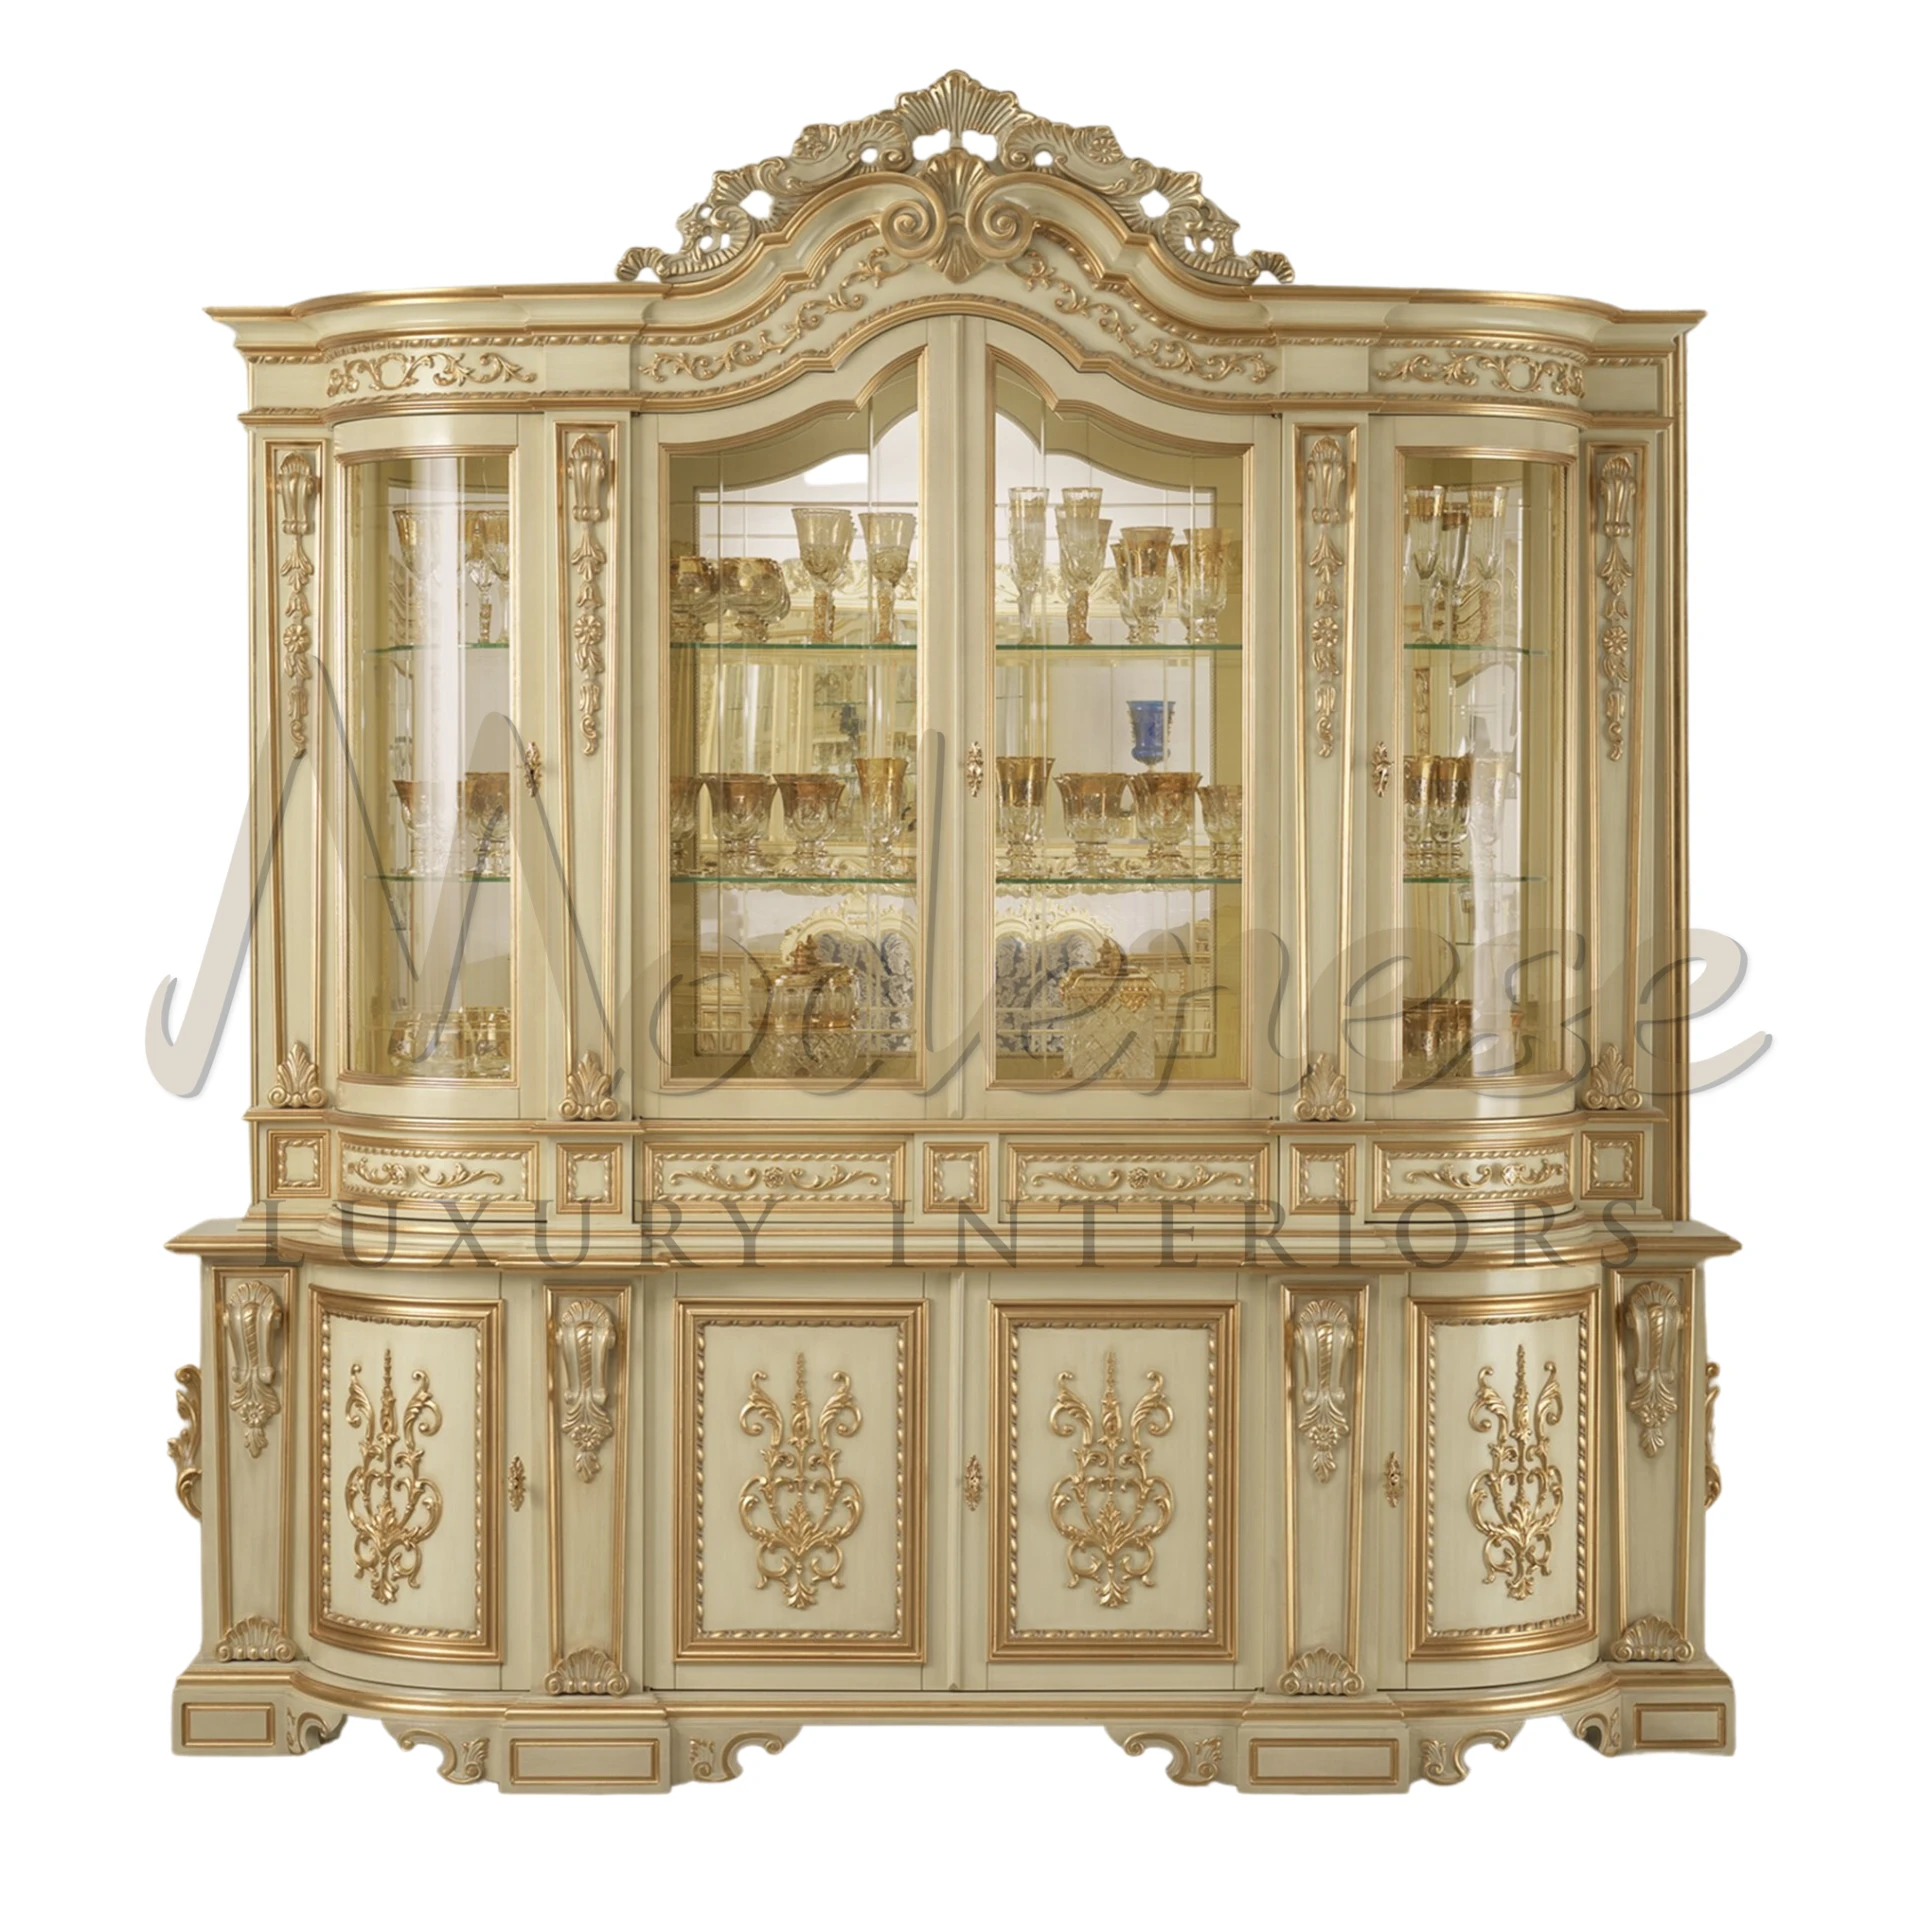 Italian Designed luxury ivory cabinet with detailed gold trim and crest